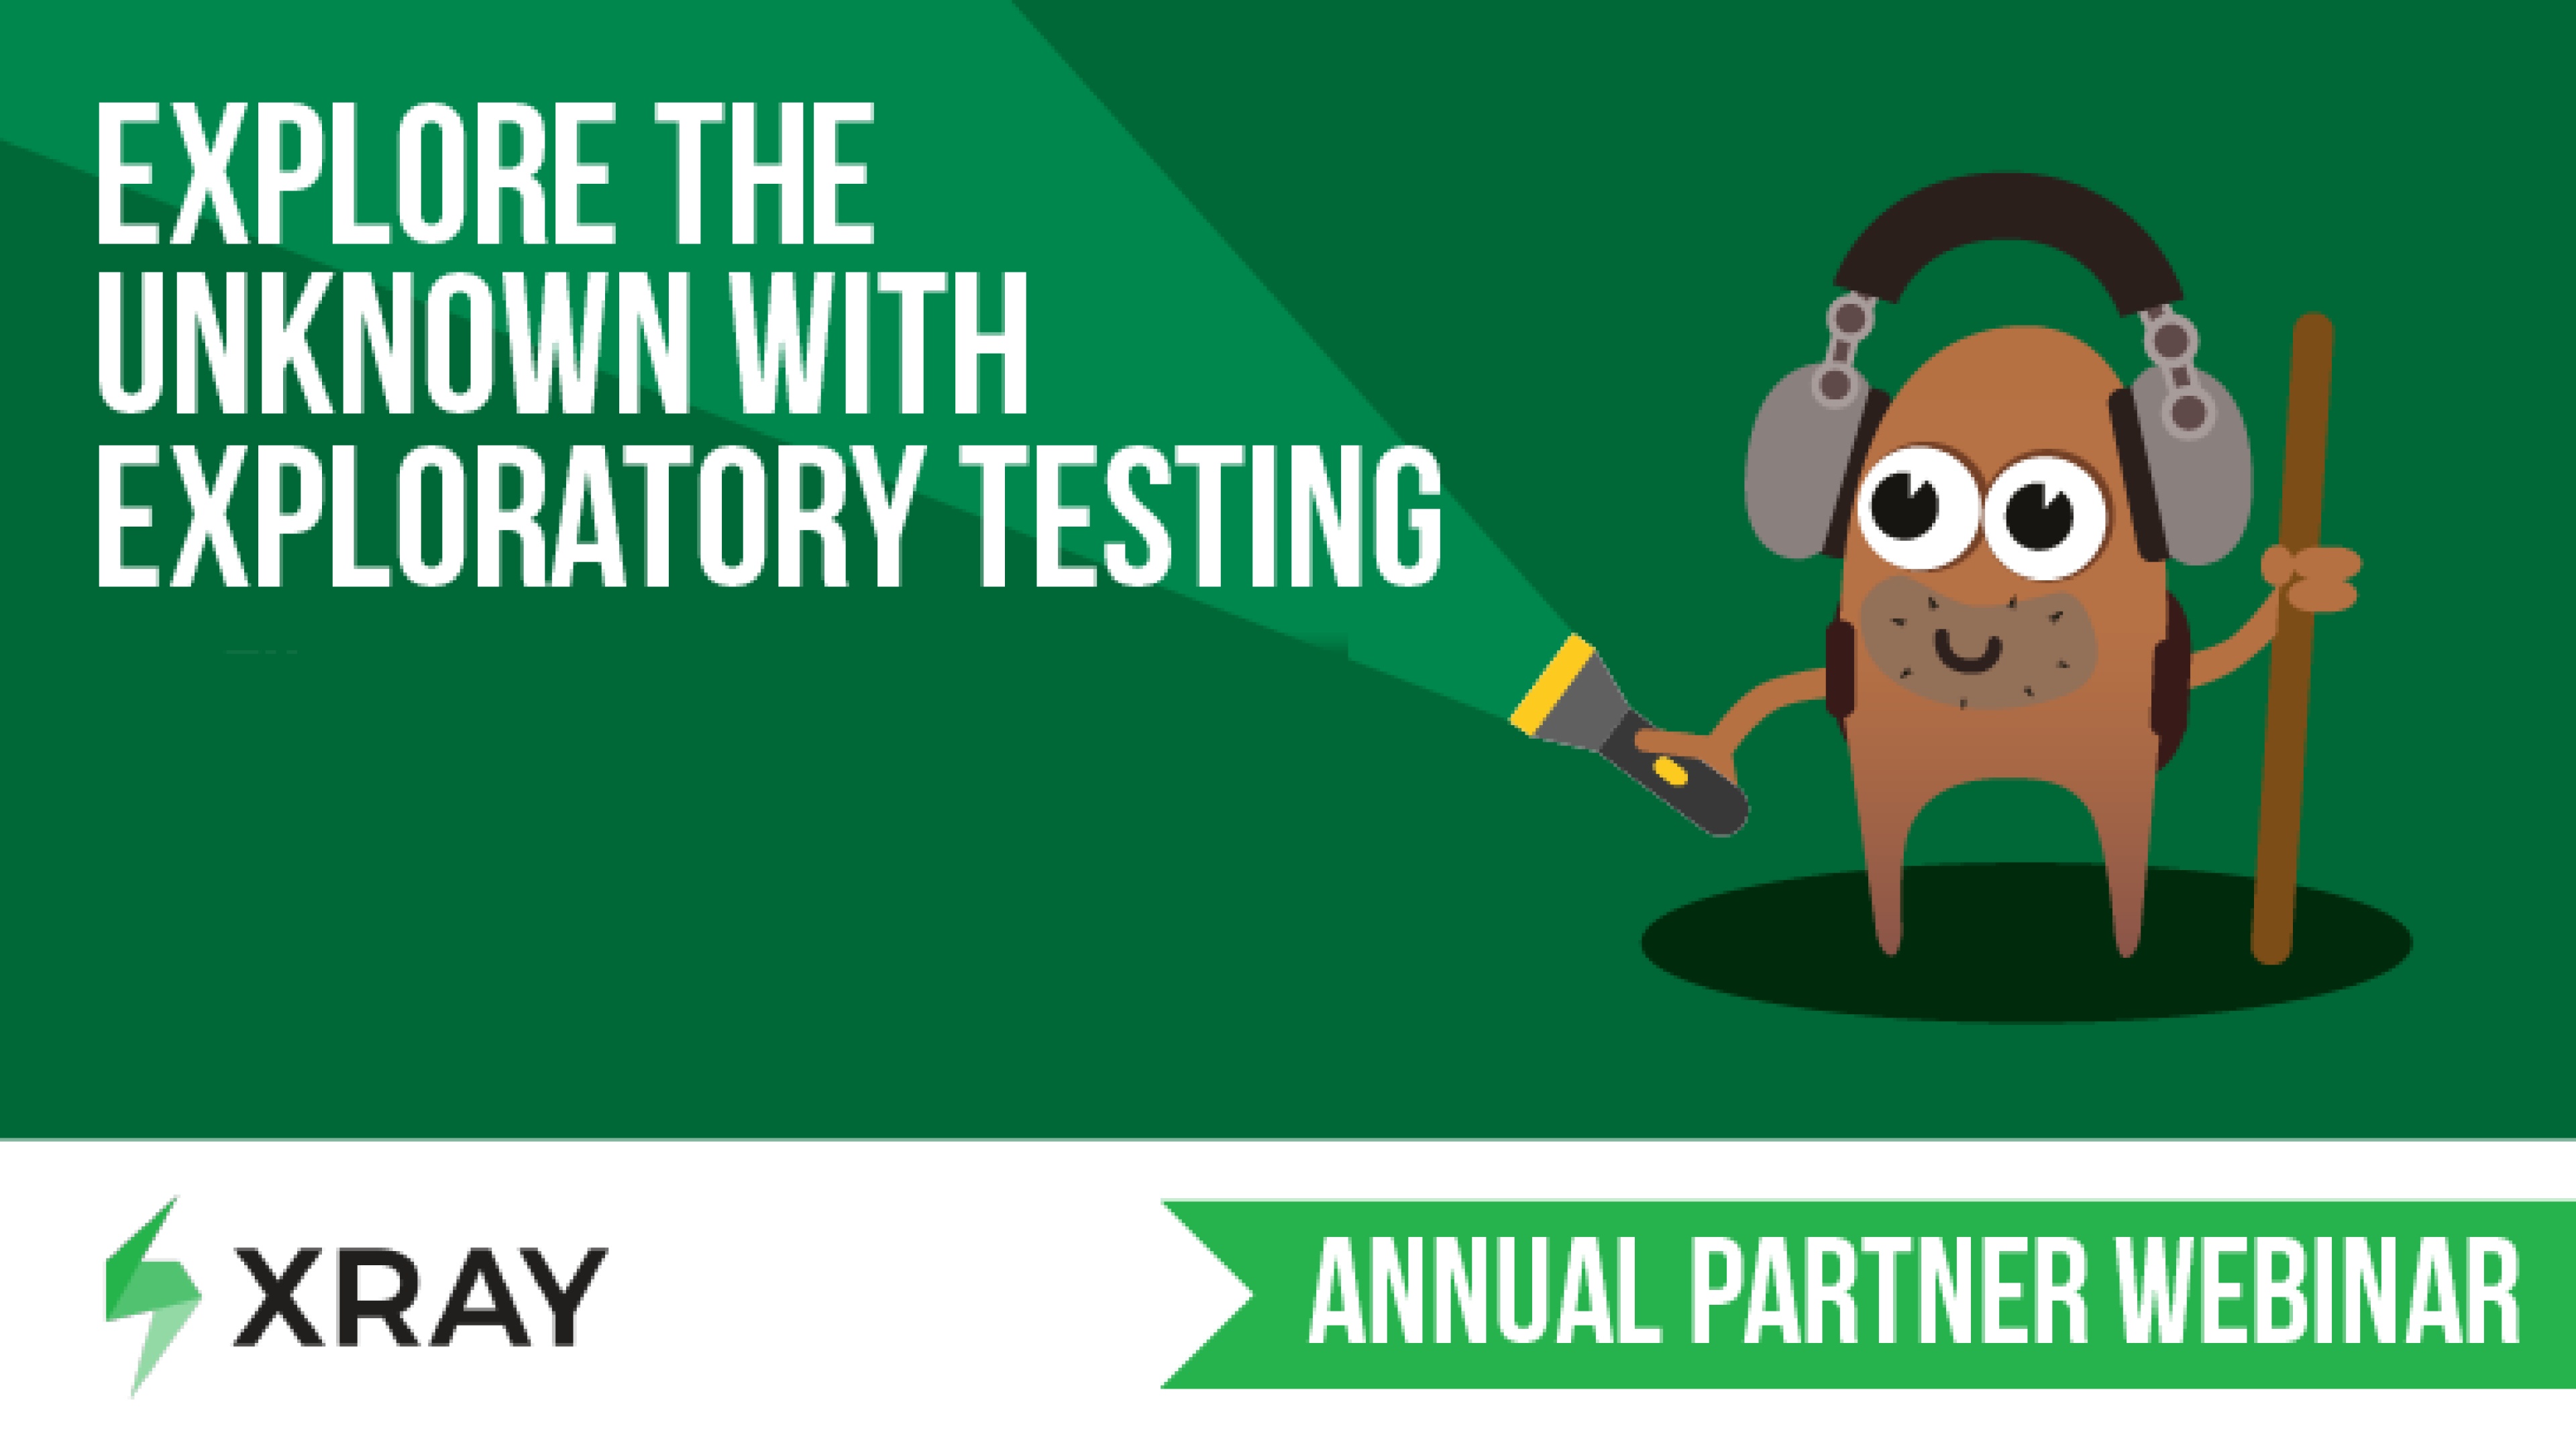 Explore the unknown with exploratory testing - Sérgio Freire